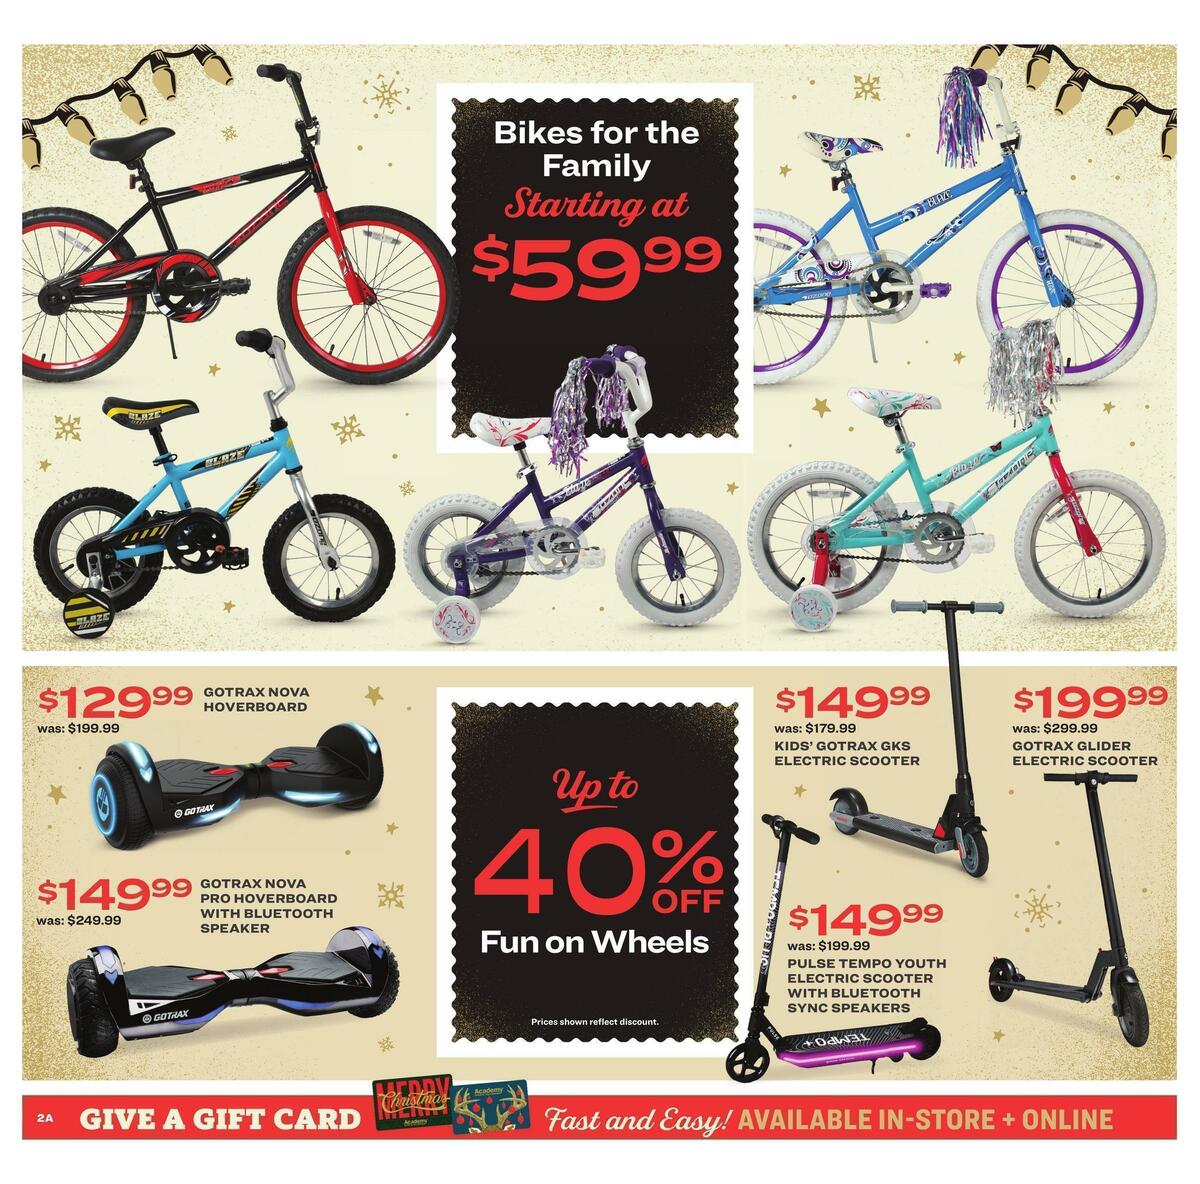 Academy Sports + Outdoors Weekly Ad from November 20